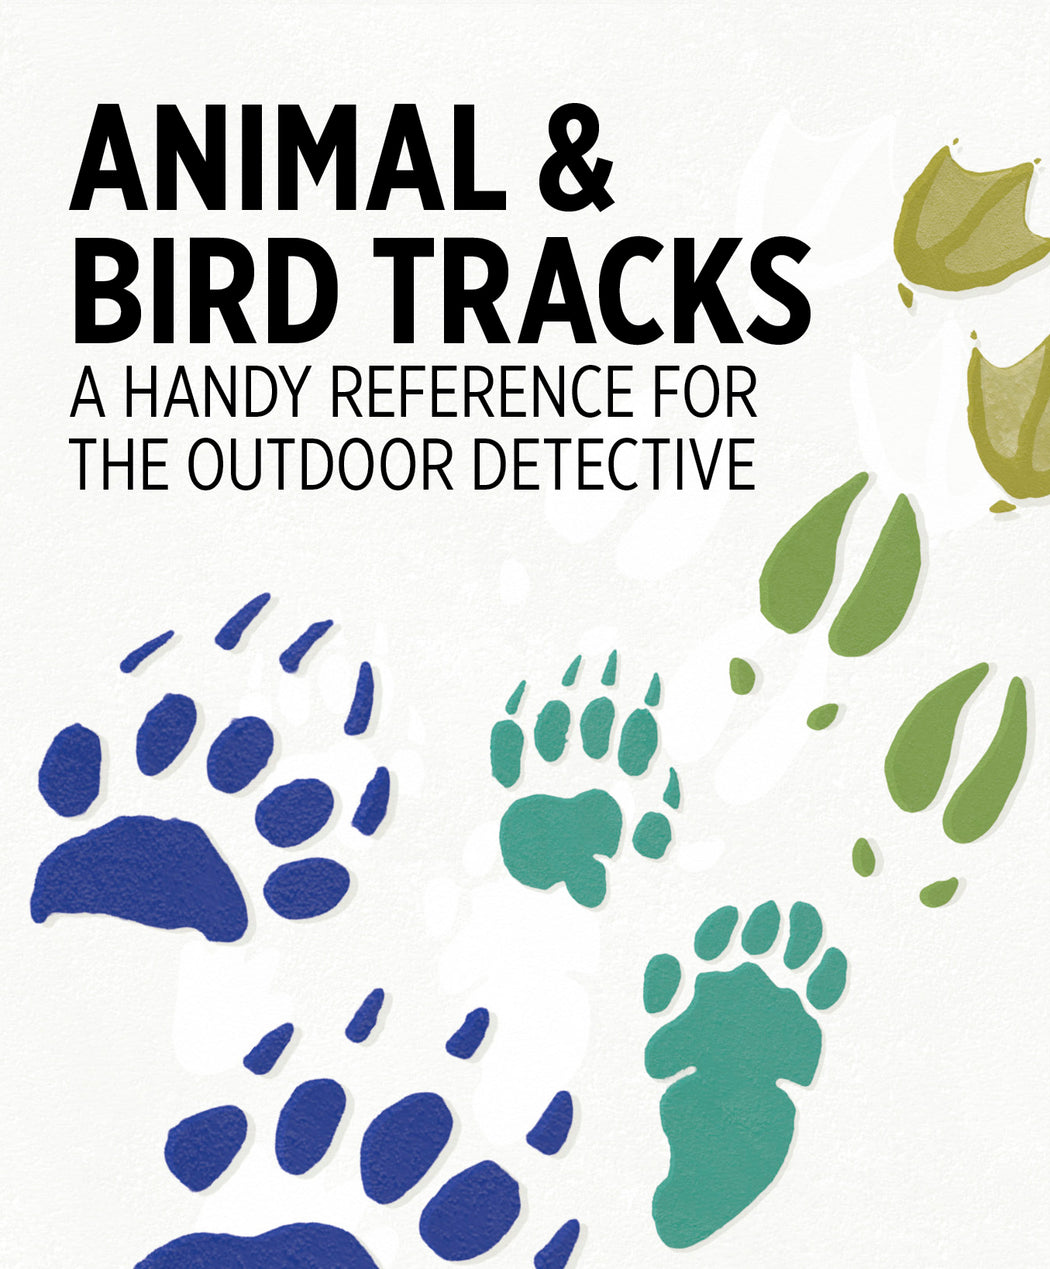 Animal & Bird Tracks: A Handy Reference for the Outdoor Detective Knowledge Cards_Zoom